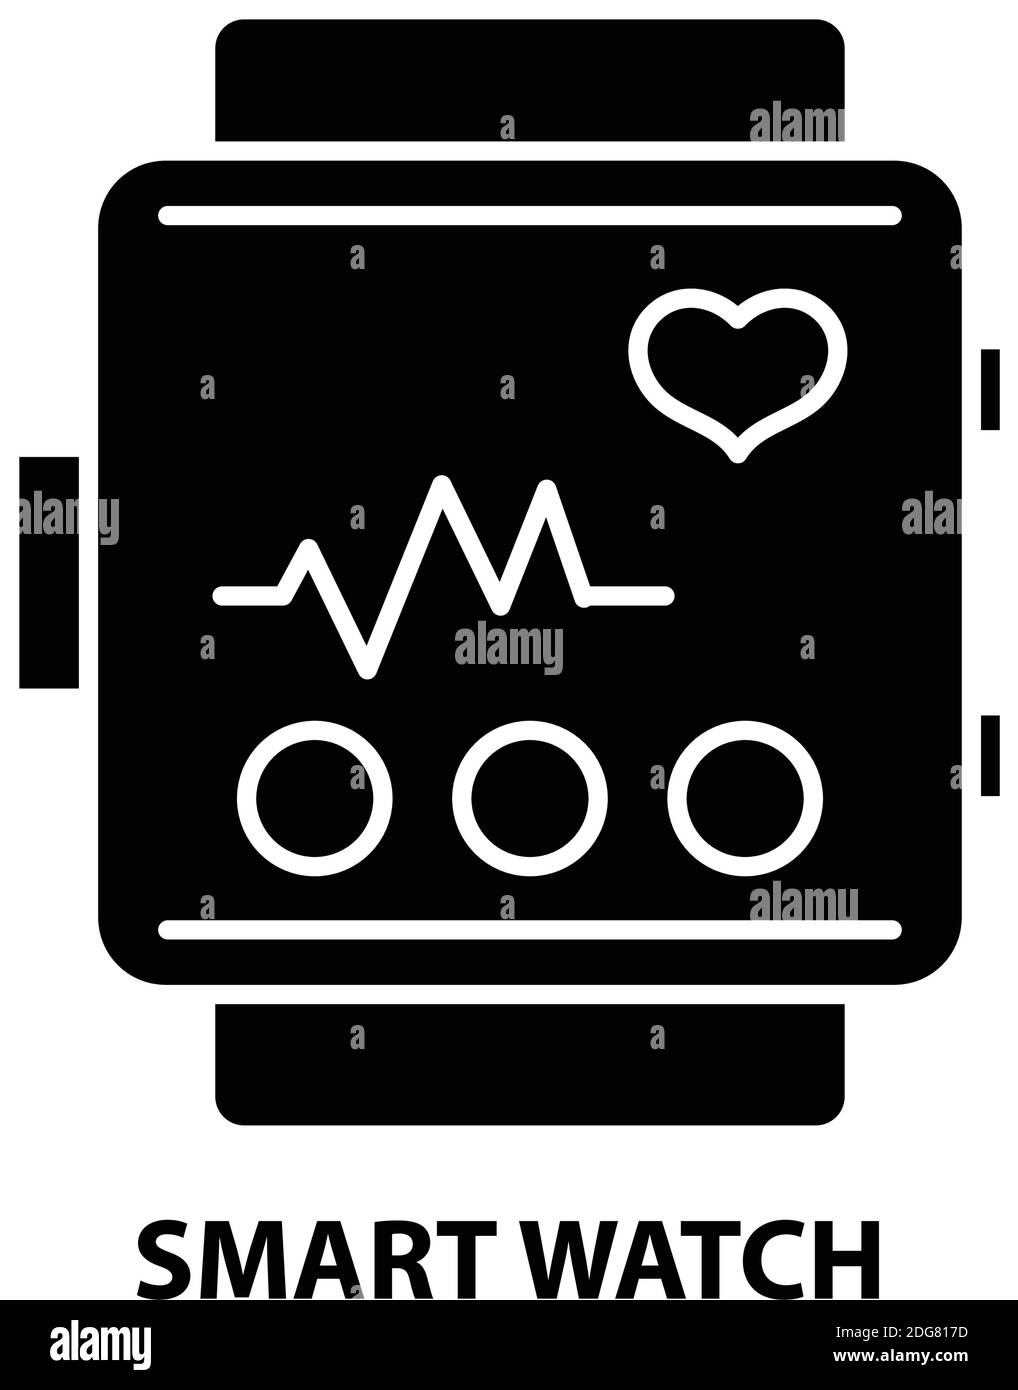 smart watch icon, black vector sign with editable strokes, concept illustration Stock Vector